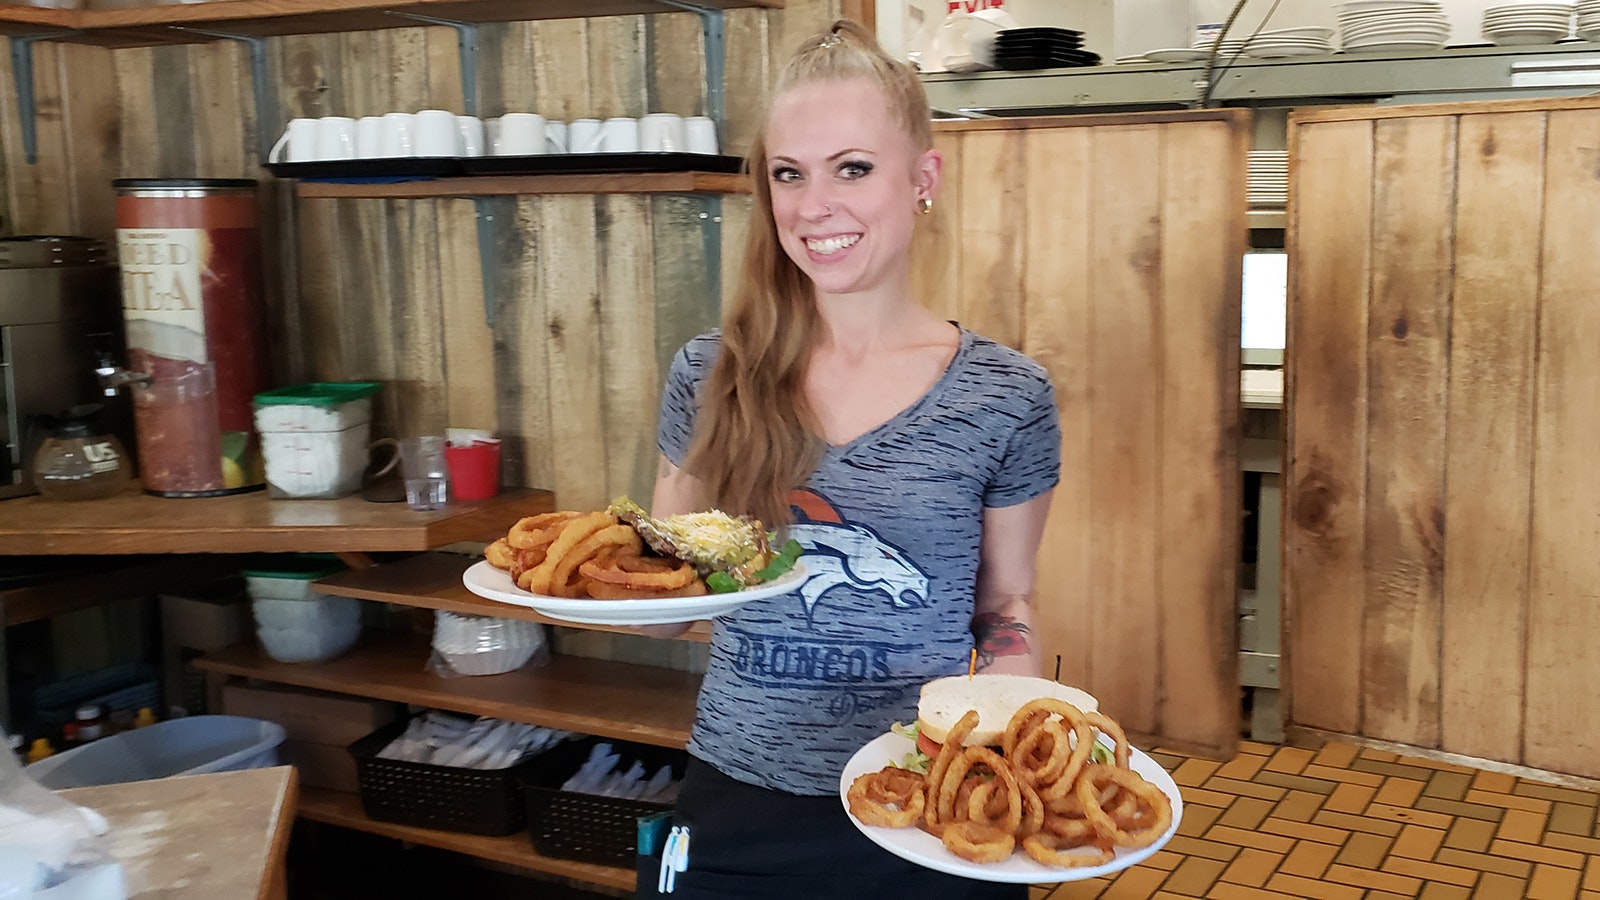 Kelsey Huntoon carries out plates heaped with onion rings and sandwiches during a lunch rush at J.W. Hugus Restaurant & Catering.